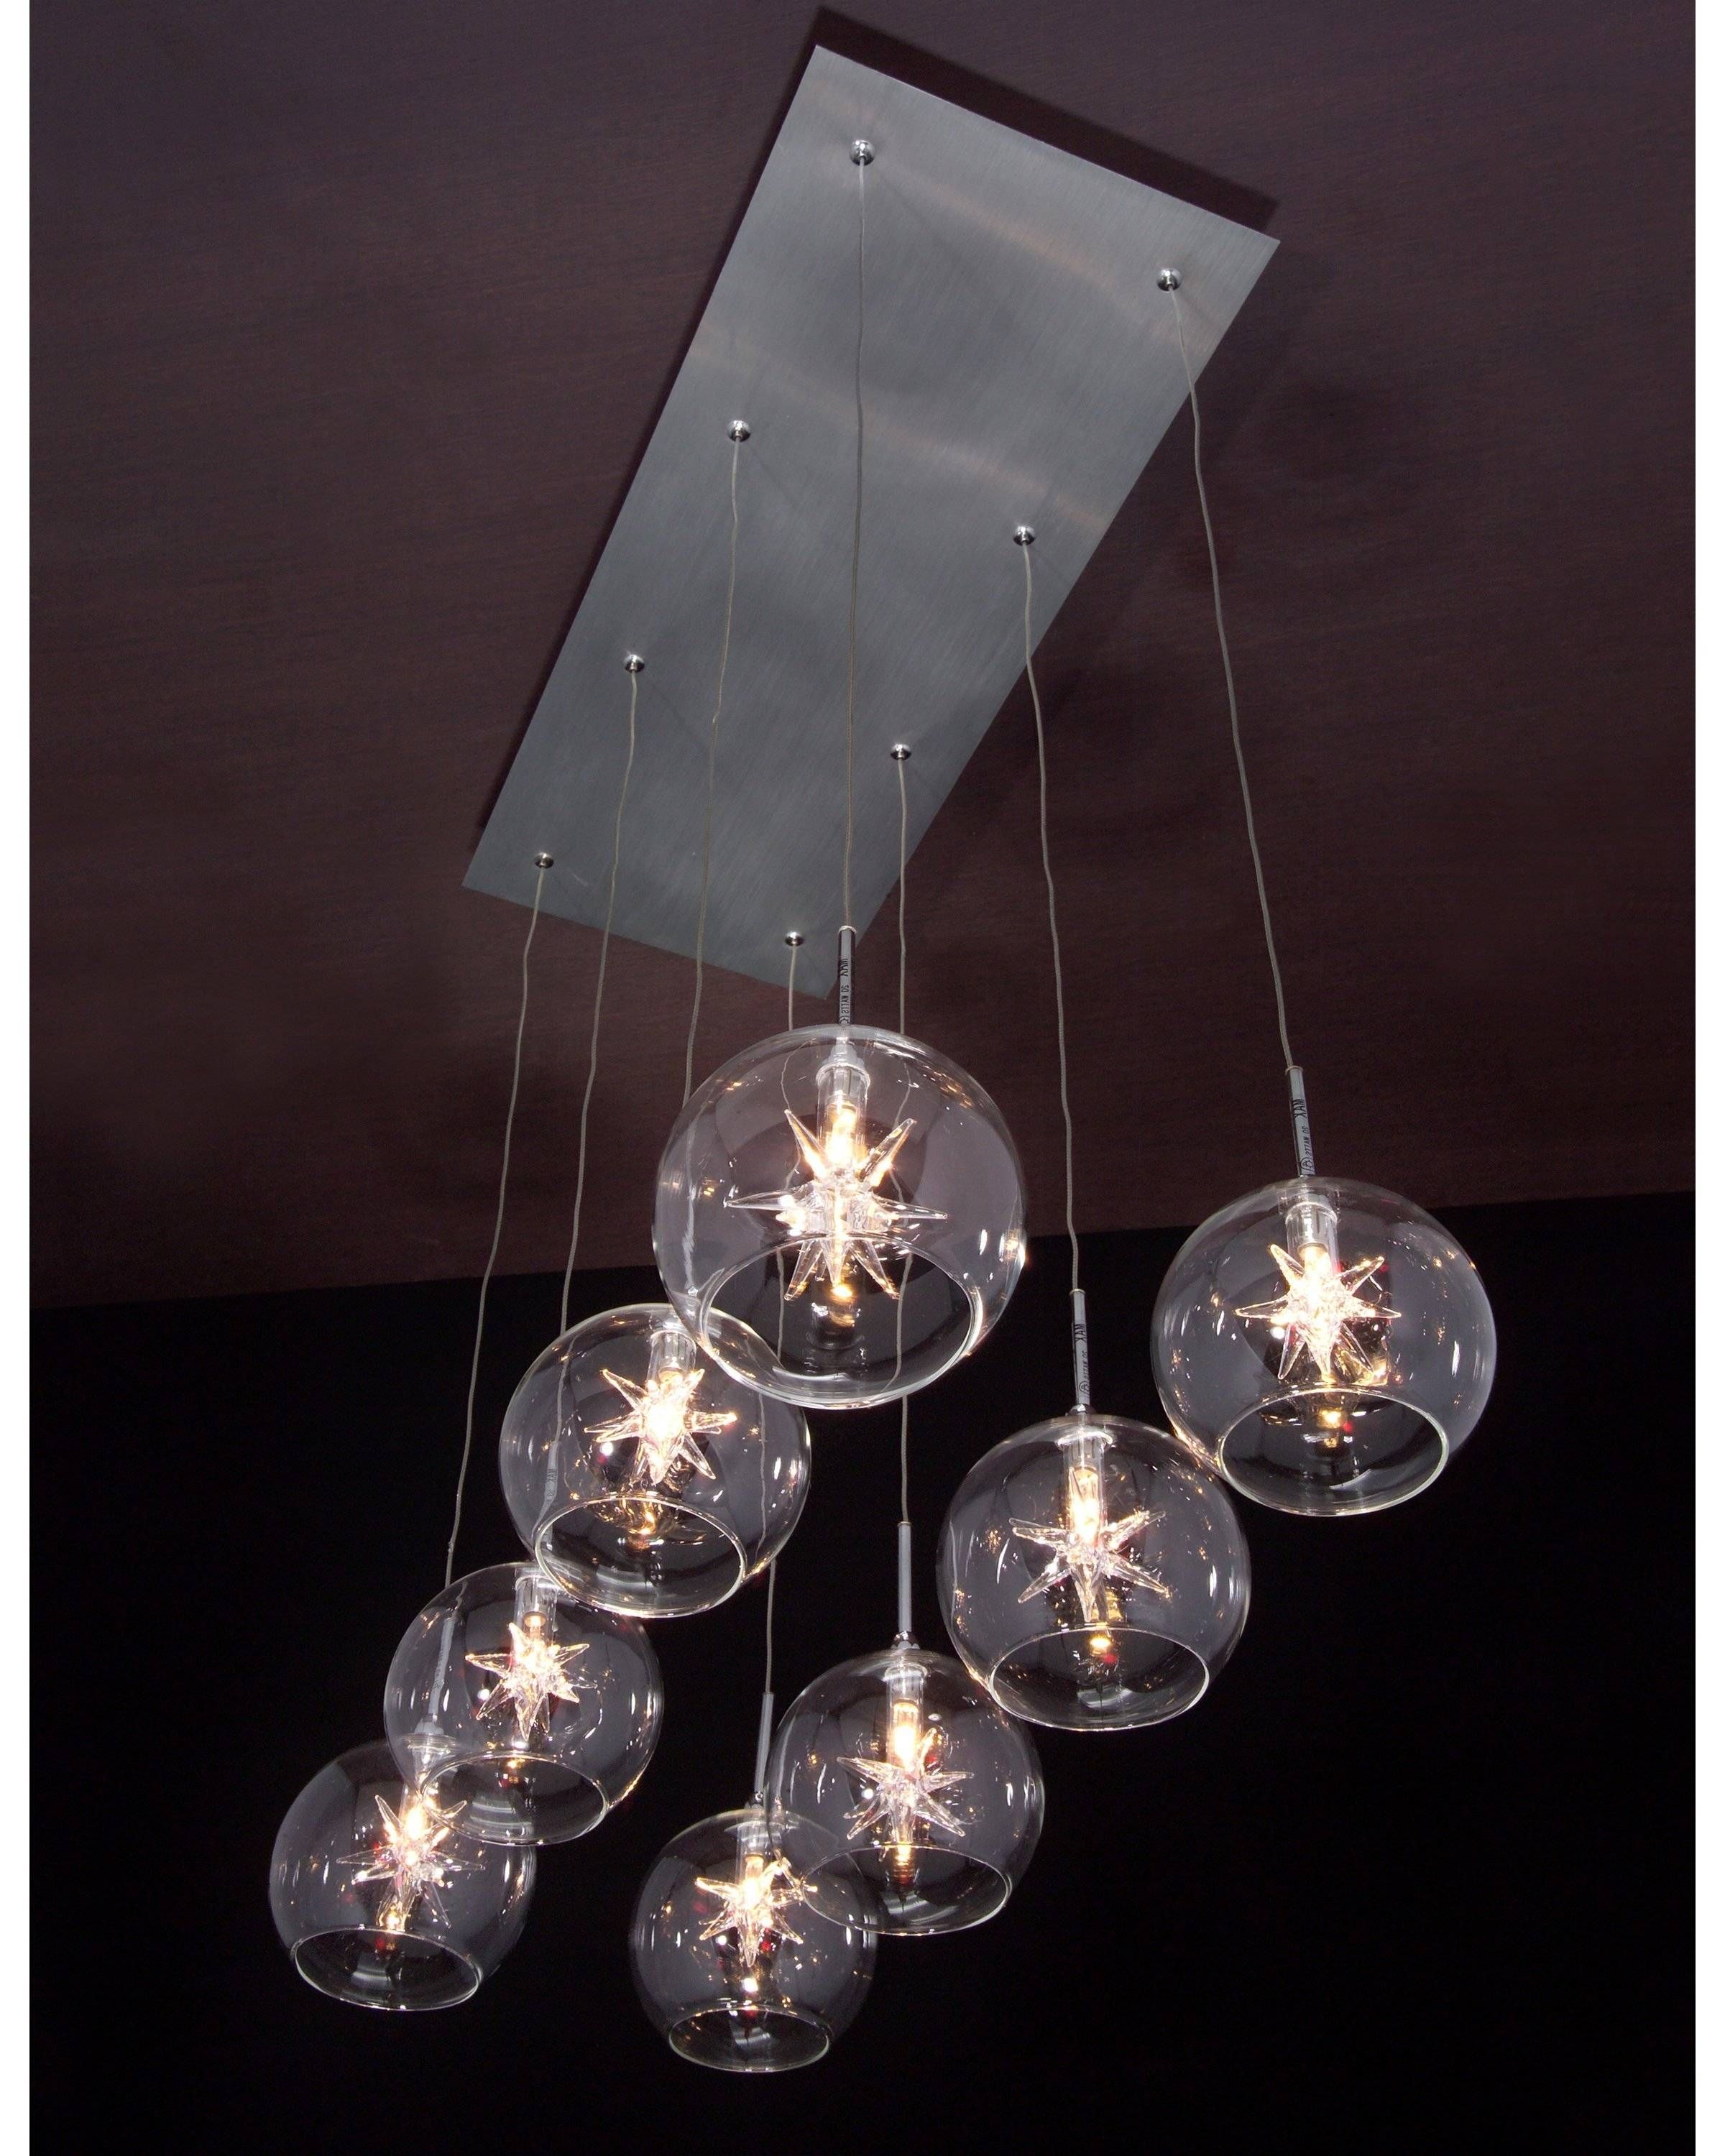 Fixtures Light : Agreeable Multi Pendant Light Fixture Kit , Multi Throughout Multiple Pendant Light Fixtures (View 2 of 15)